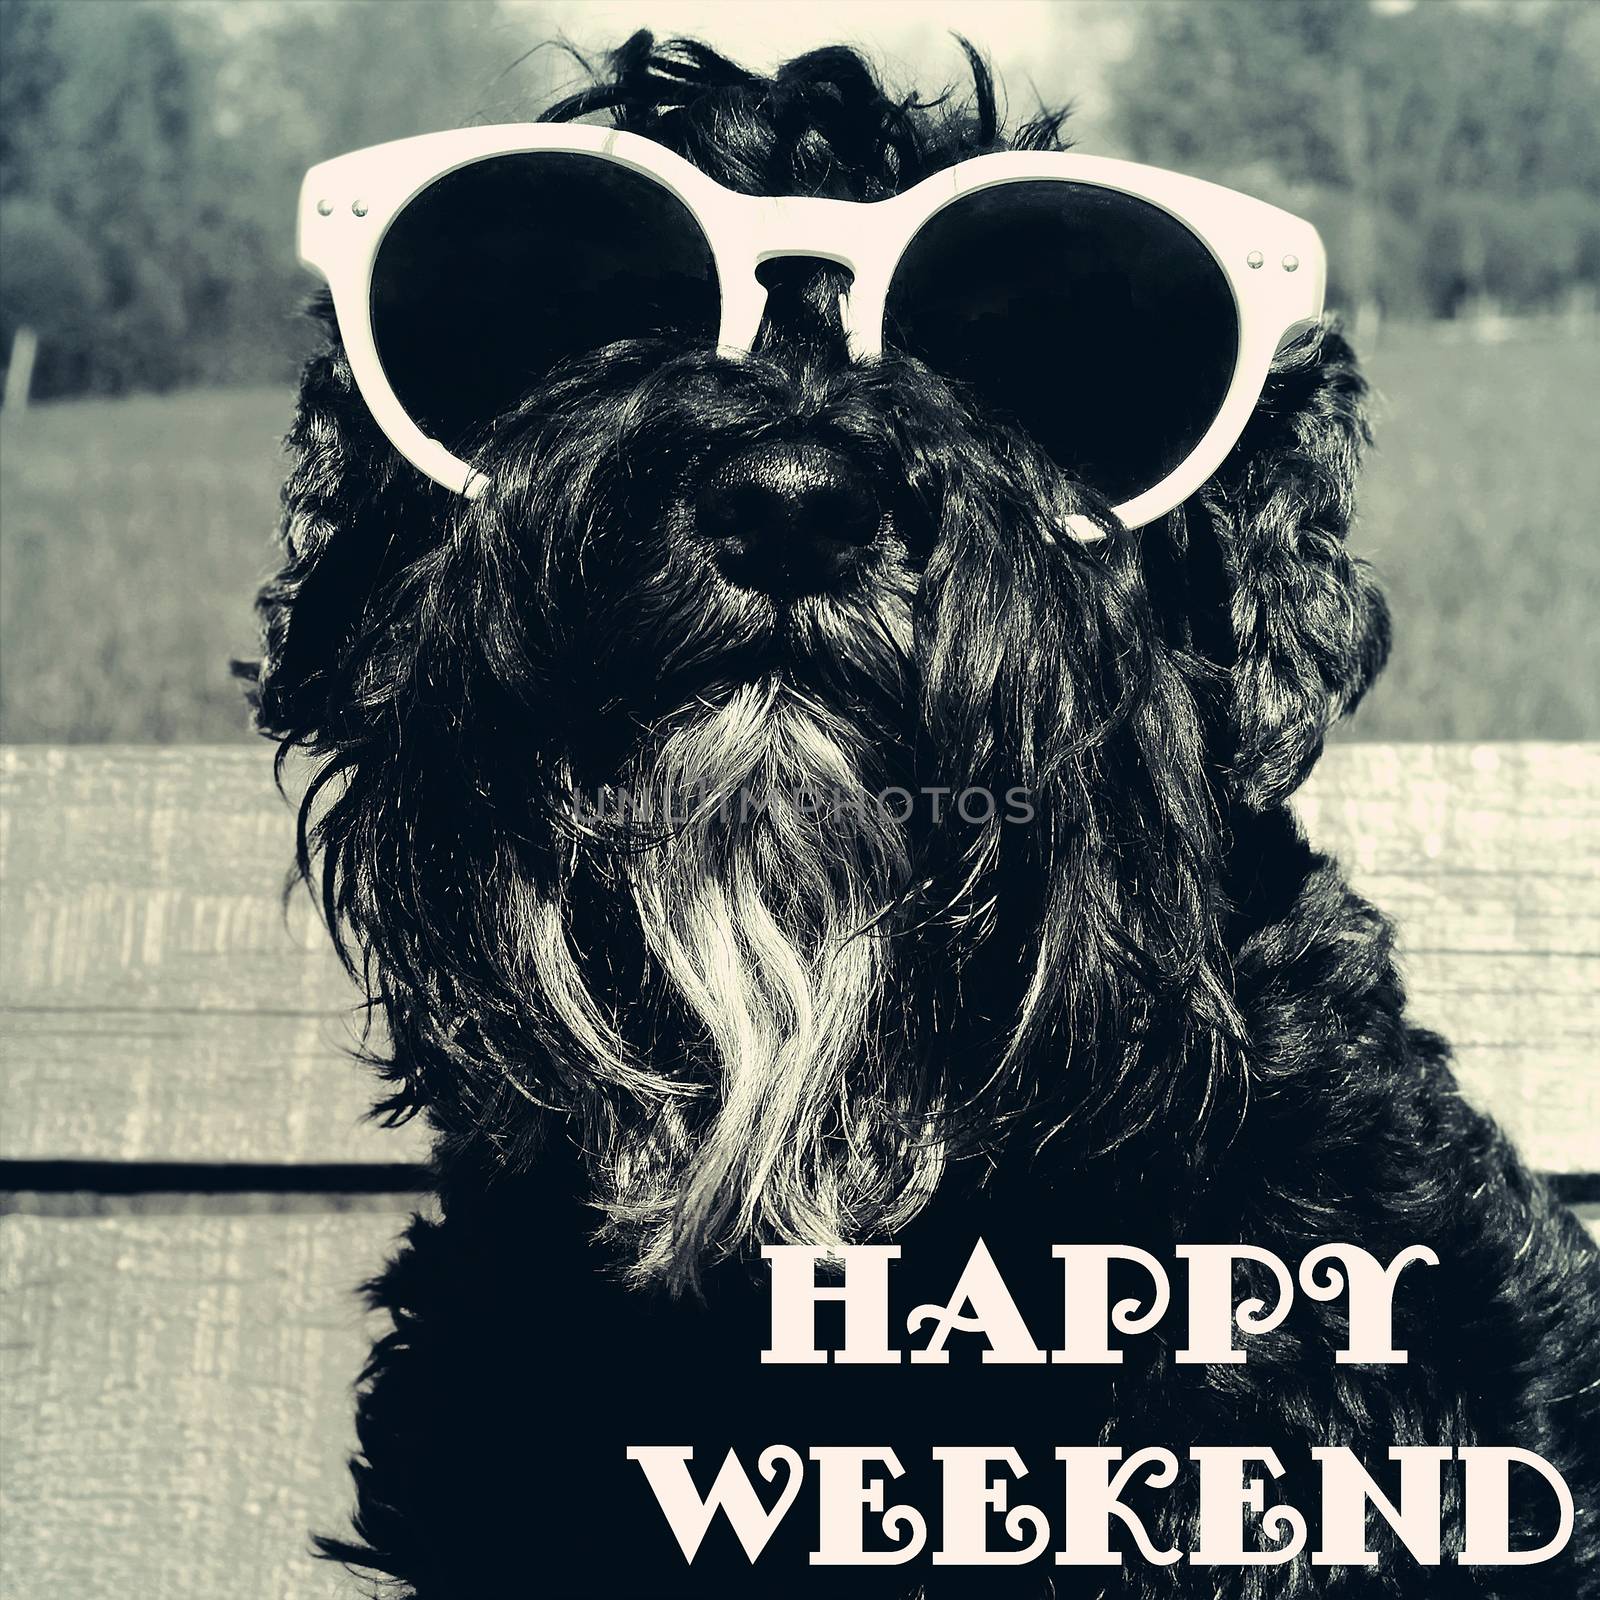 Dog in sunglasses with text: Happy weekend by Voinakh